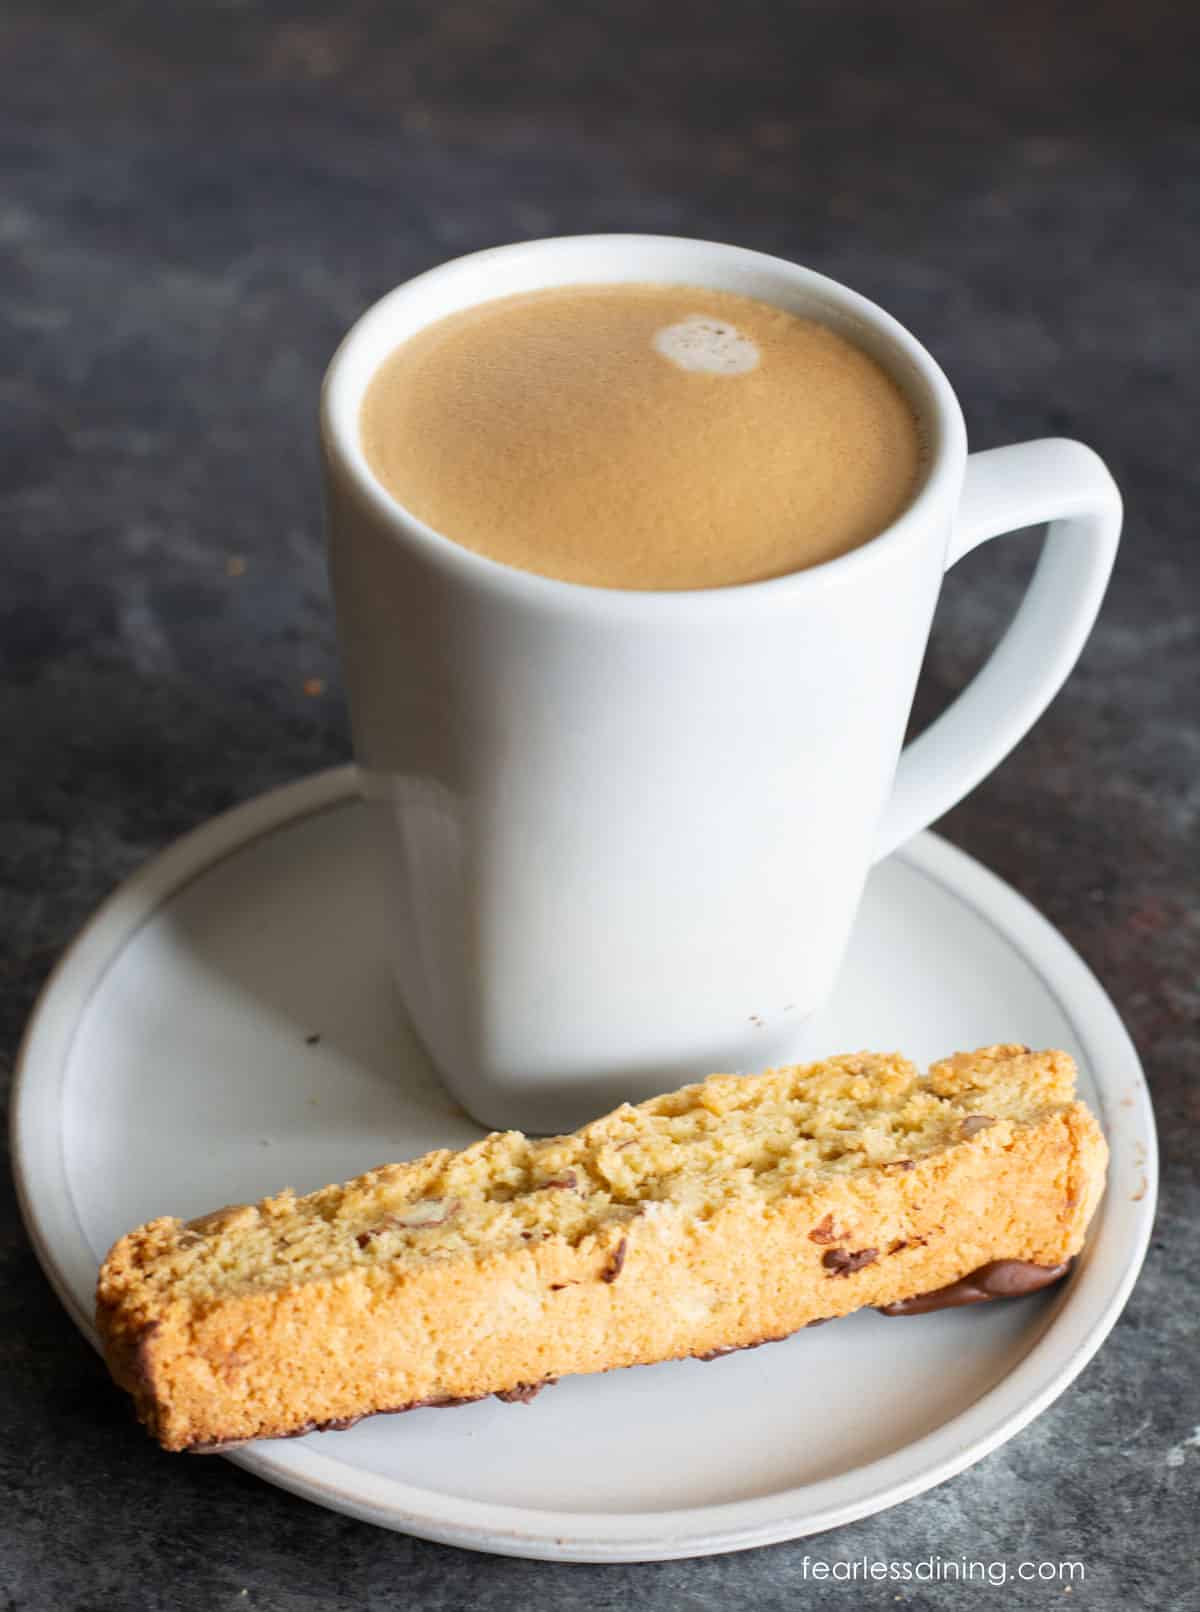 A slice of almond biscotti on a small plate with a tall cup of coffee.